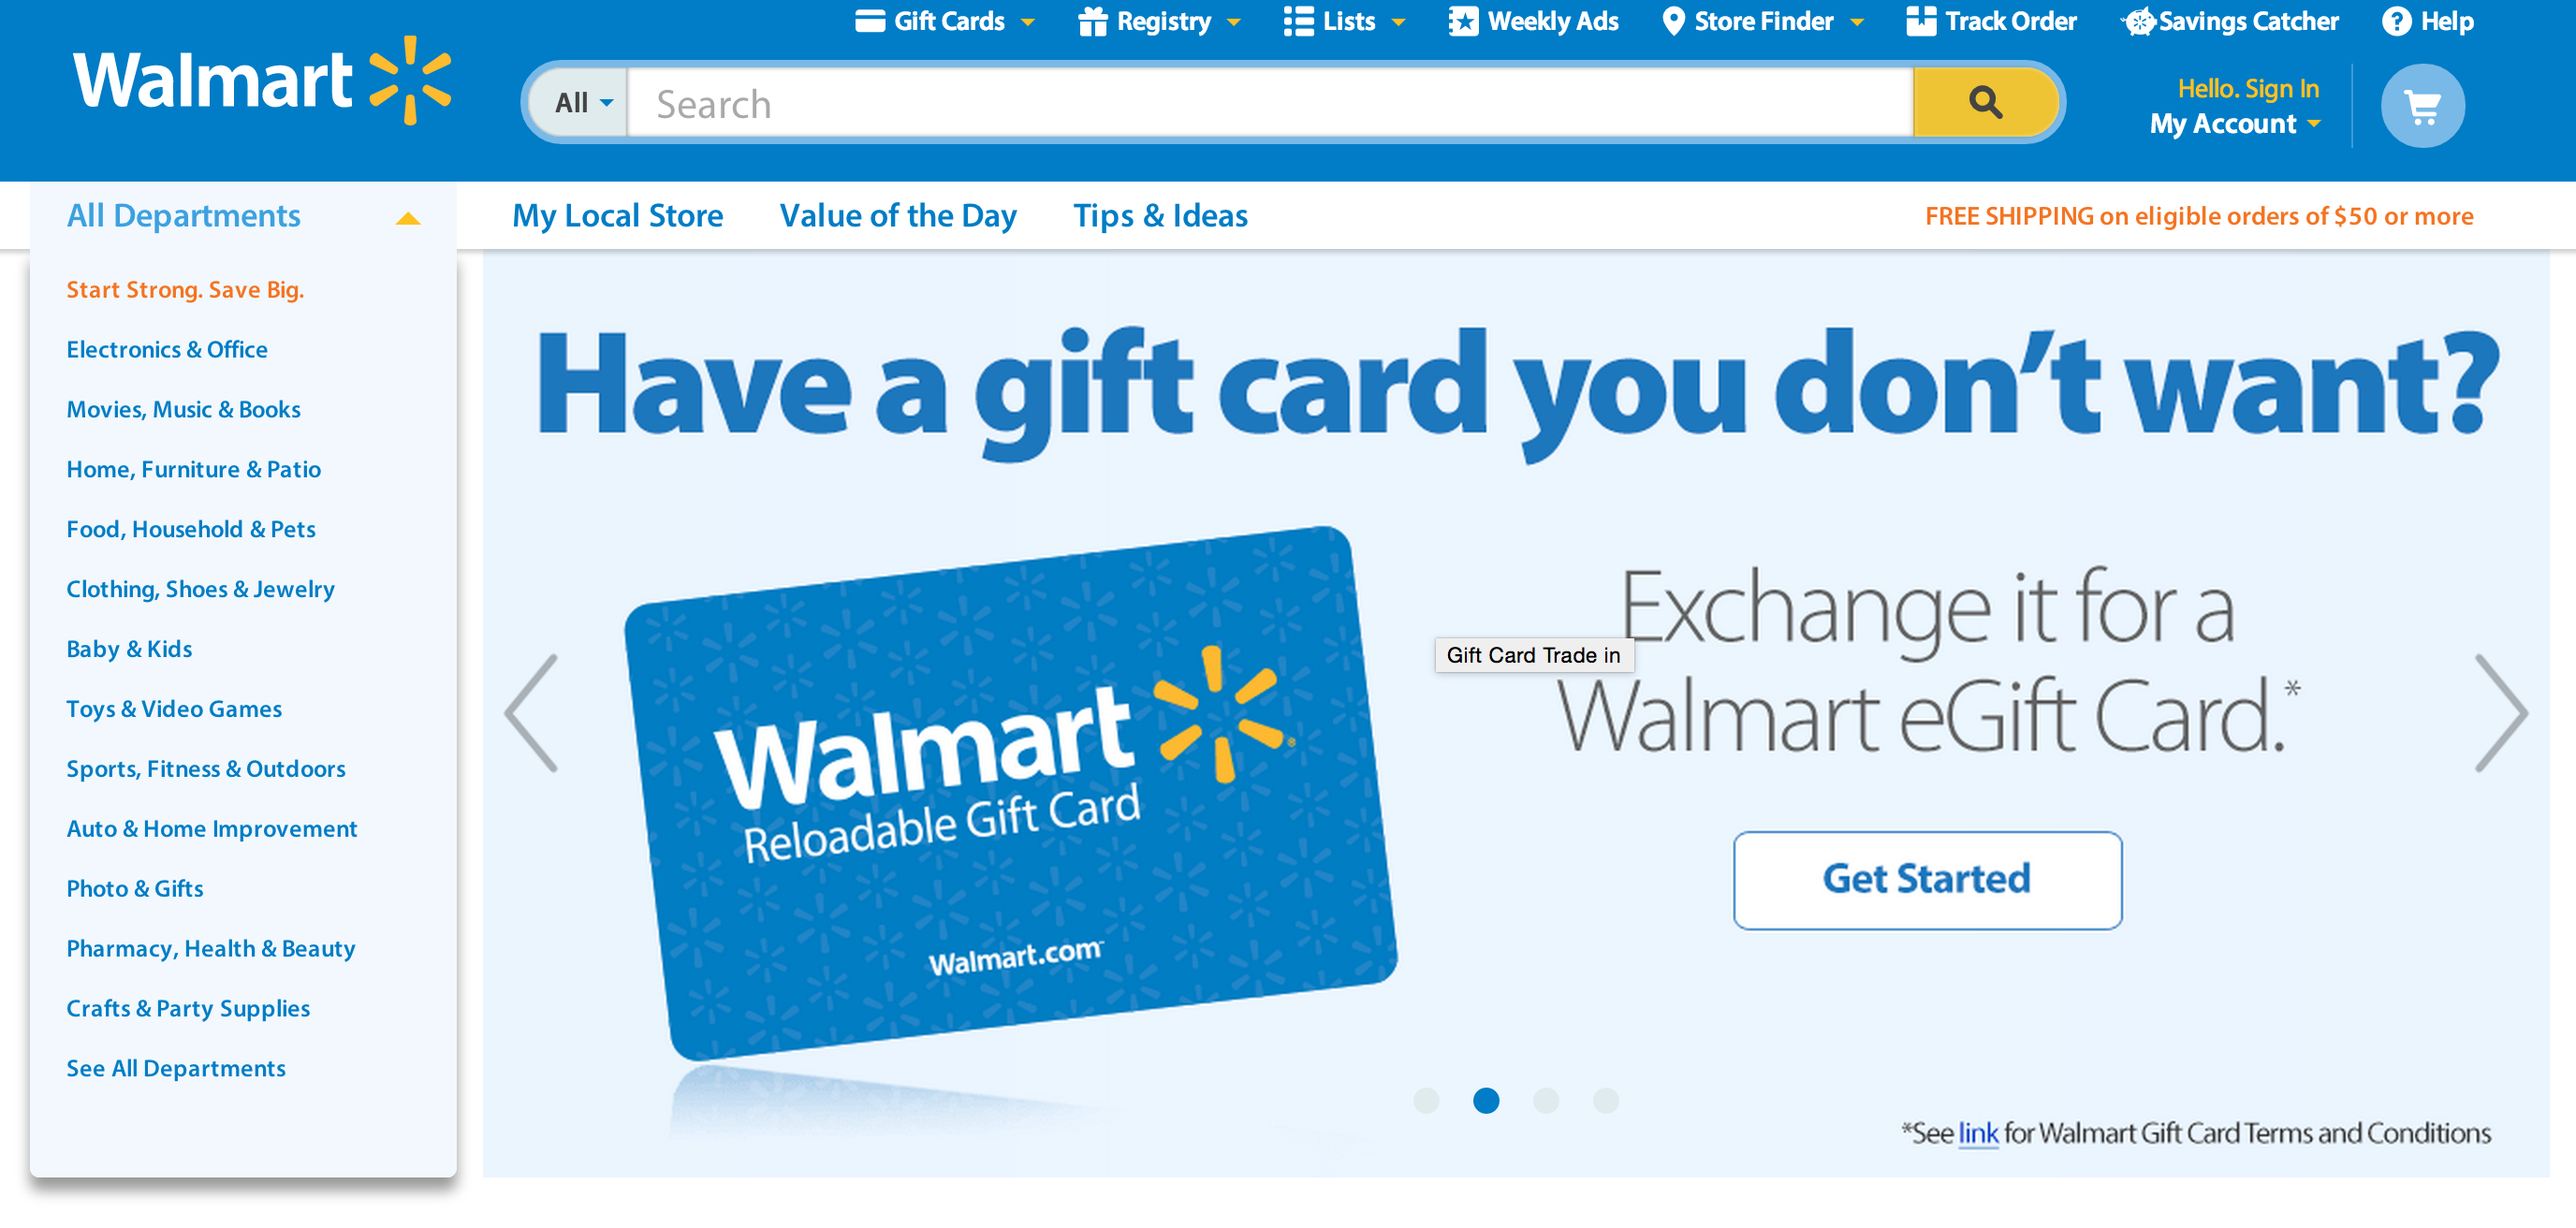 Gift Cards | Mintyn Bank | Buy, Sell Walmart Gift Cards